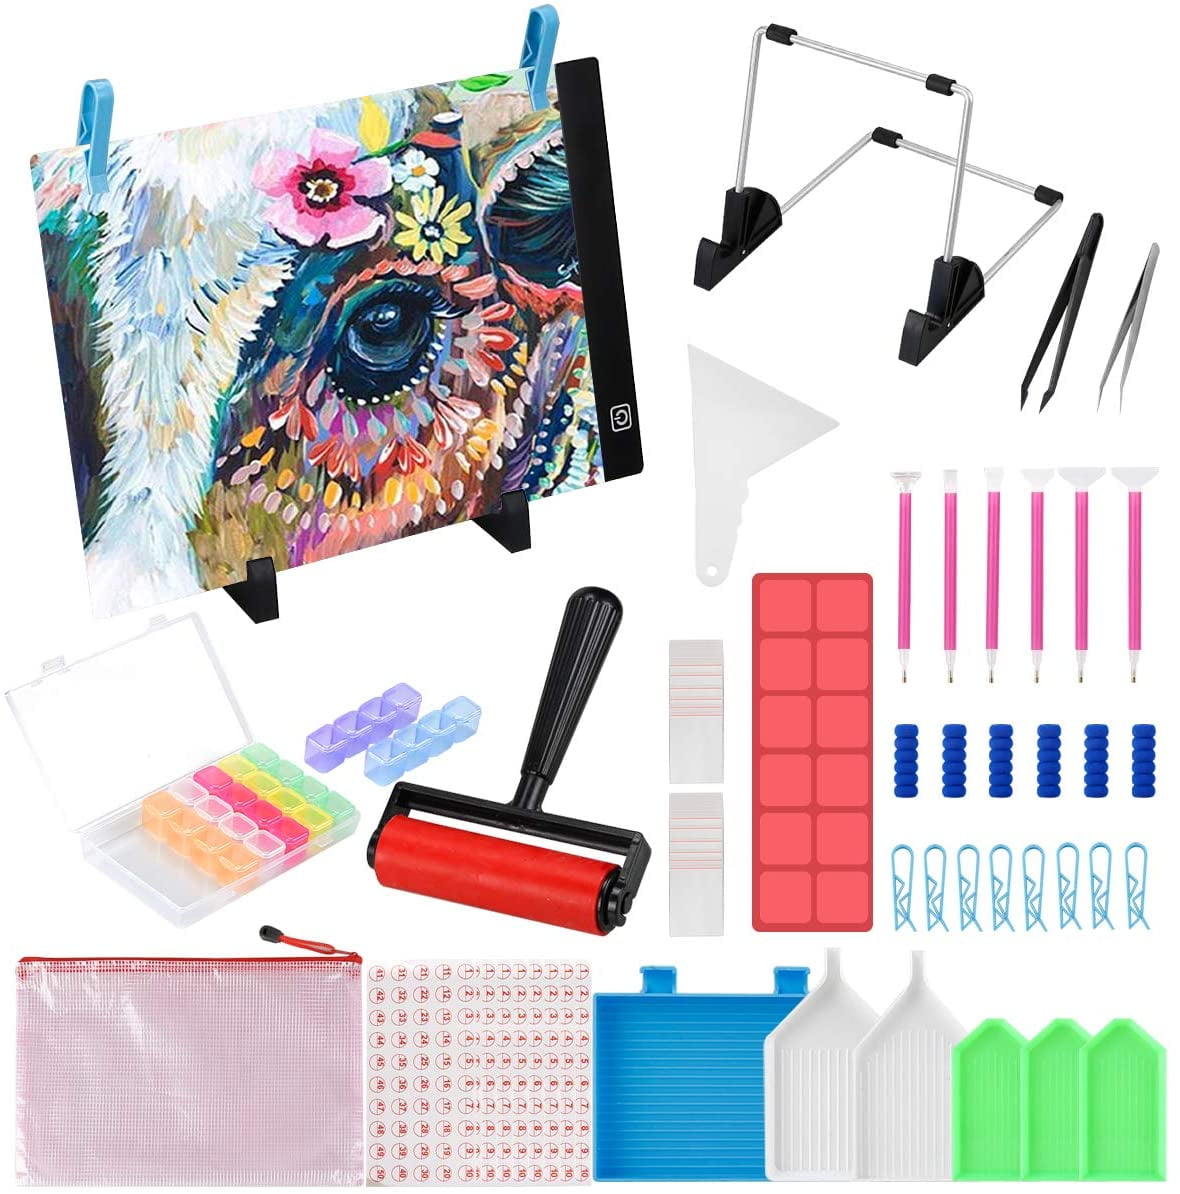 A2 Diamond Painting LED Light Pad Kit,LED Artcraft Tracing Light Table,DIY Dimmable Light Brightness Board,Reusable A2 Painting Pads Great for Full Drill & Partial Drill 5D Diamond Painting. 